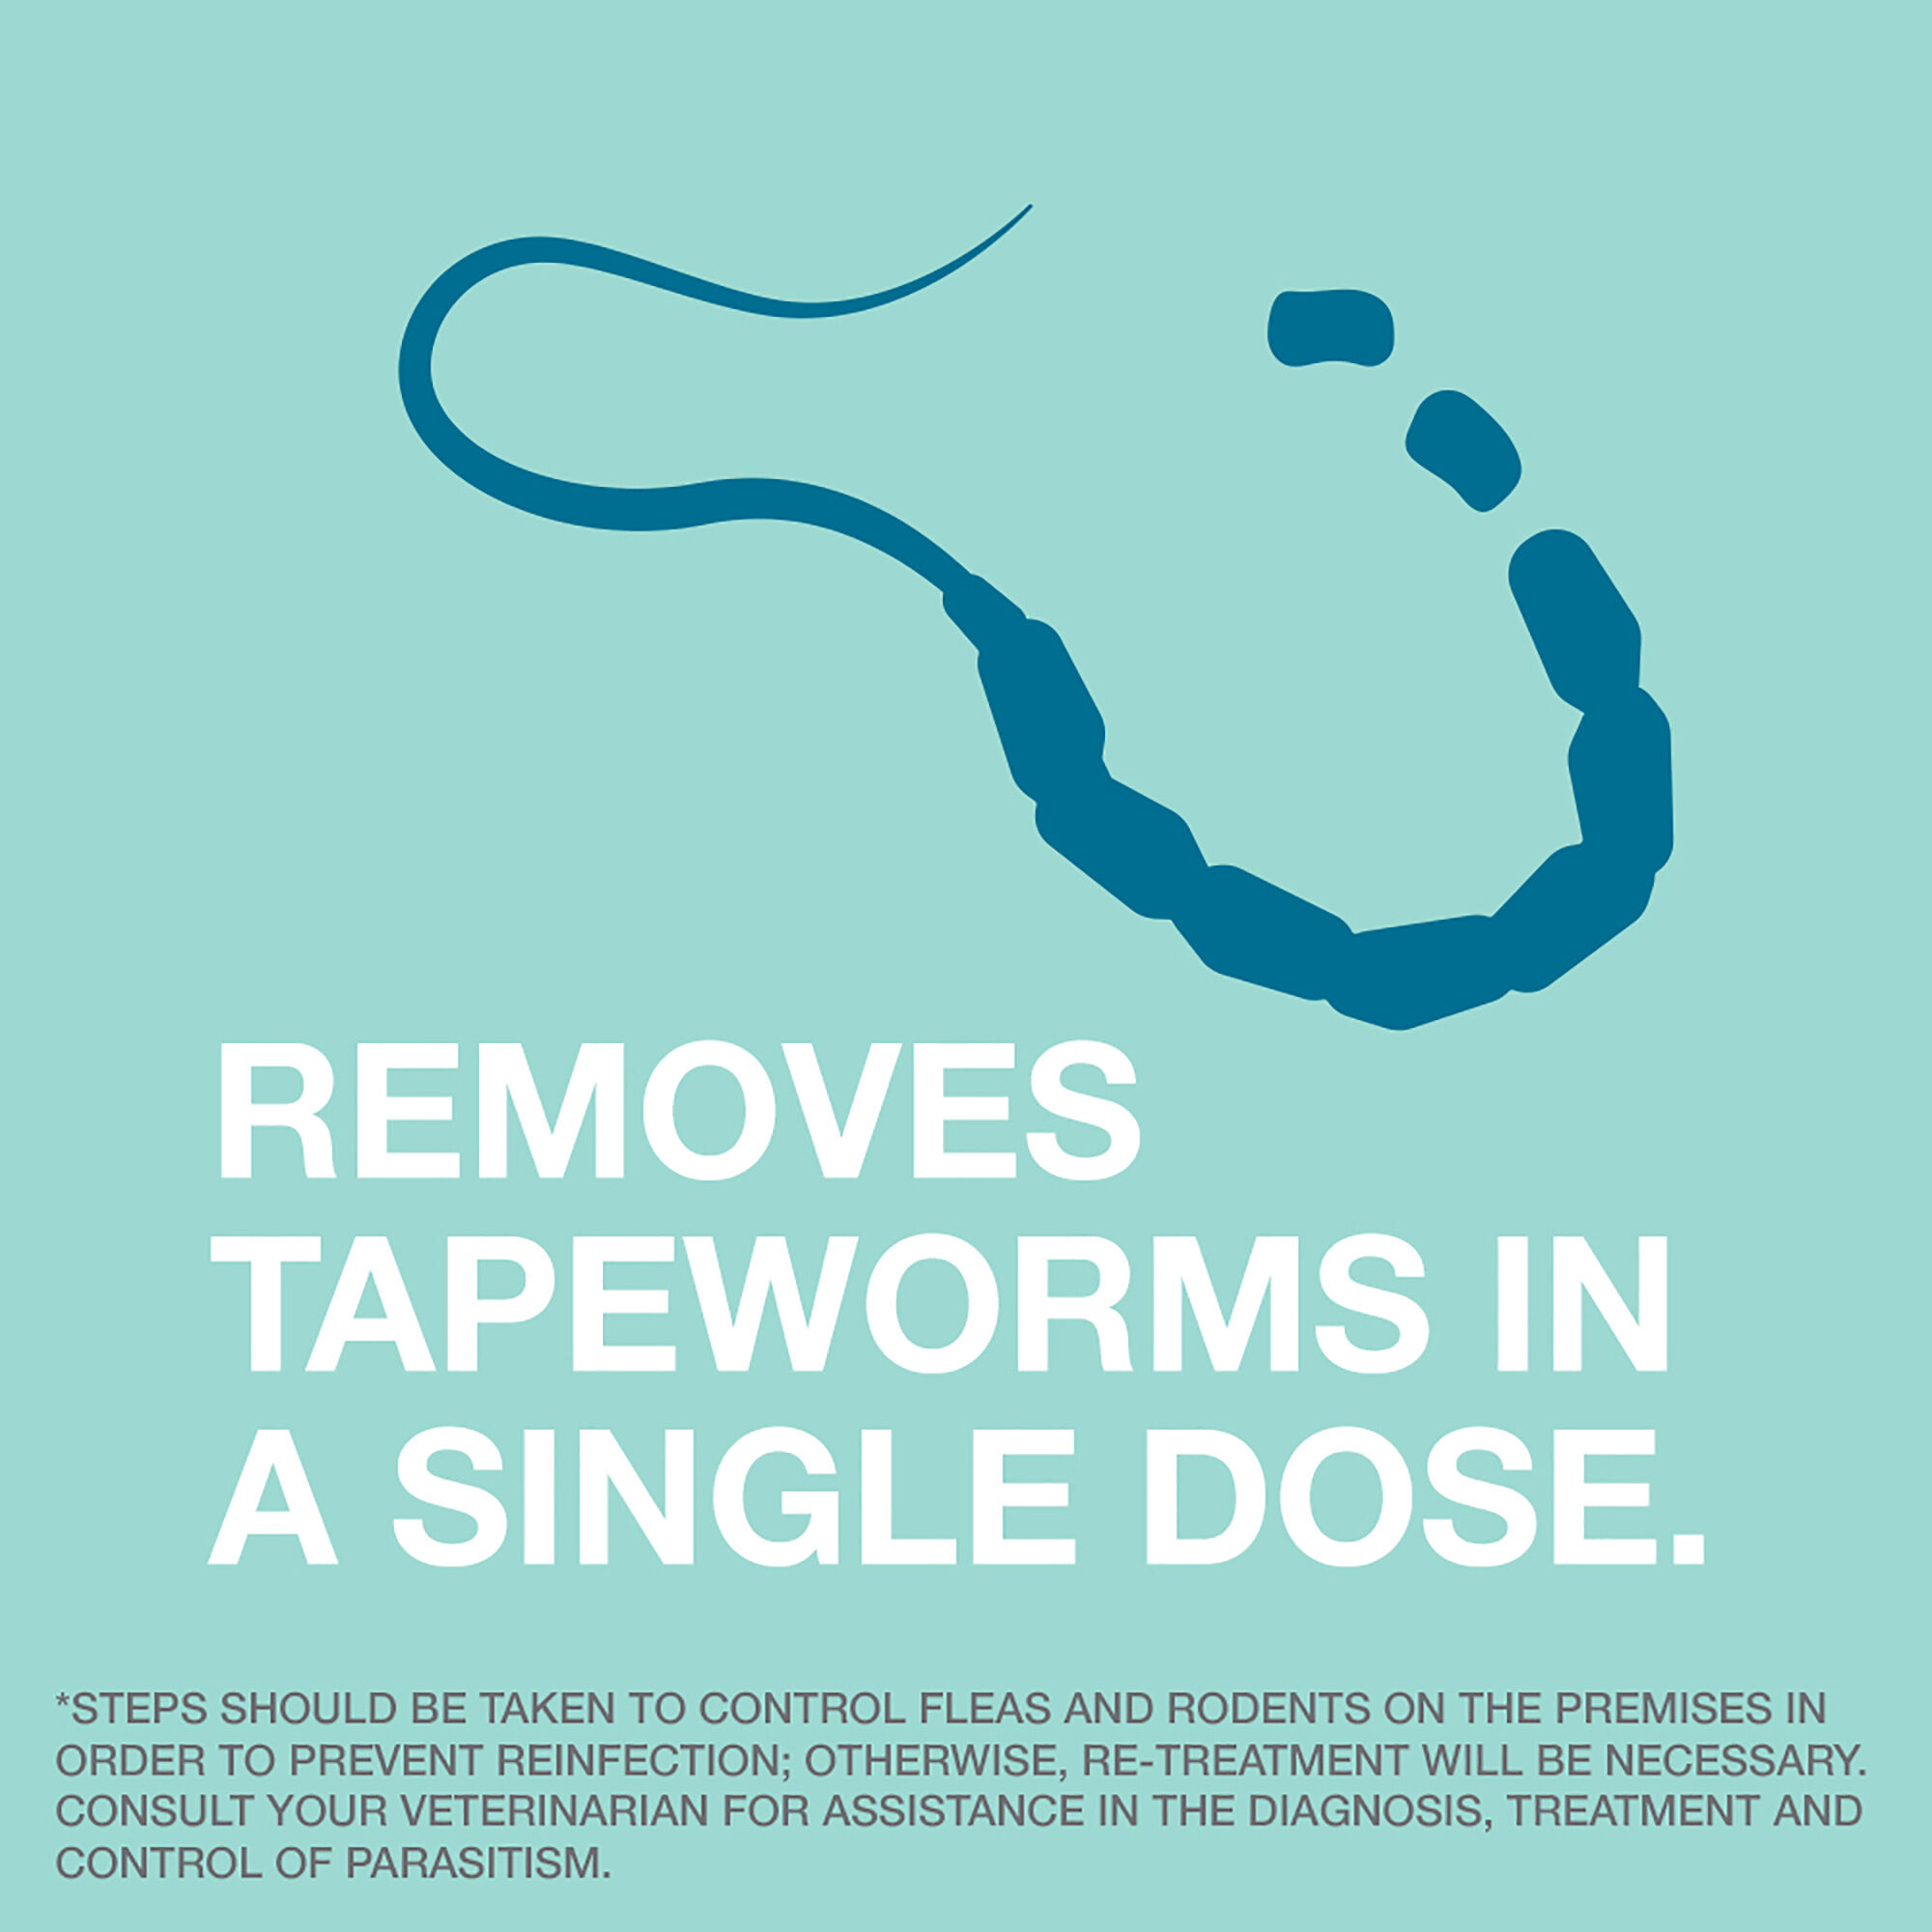 tapeworm medicine for cats and dogs